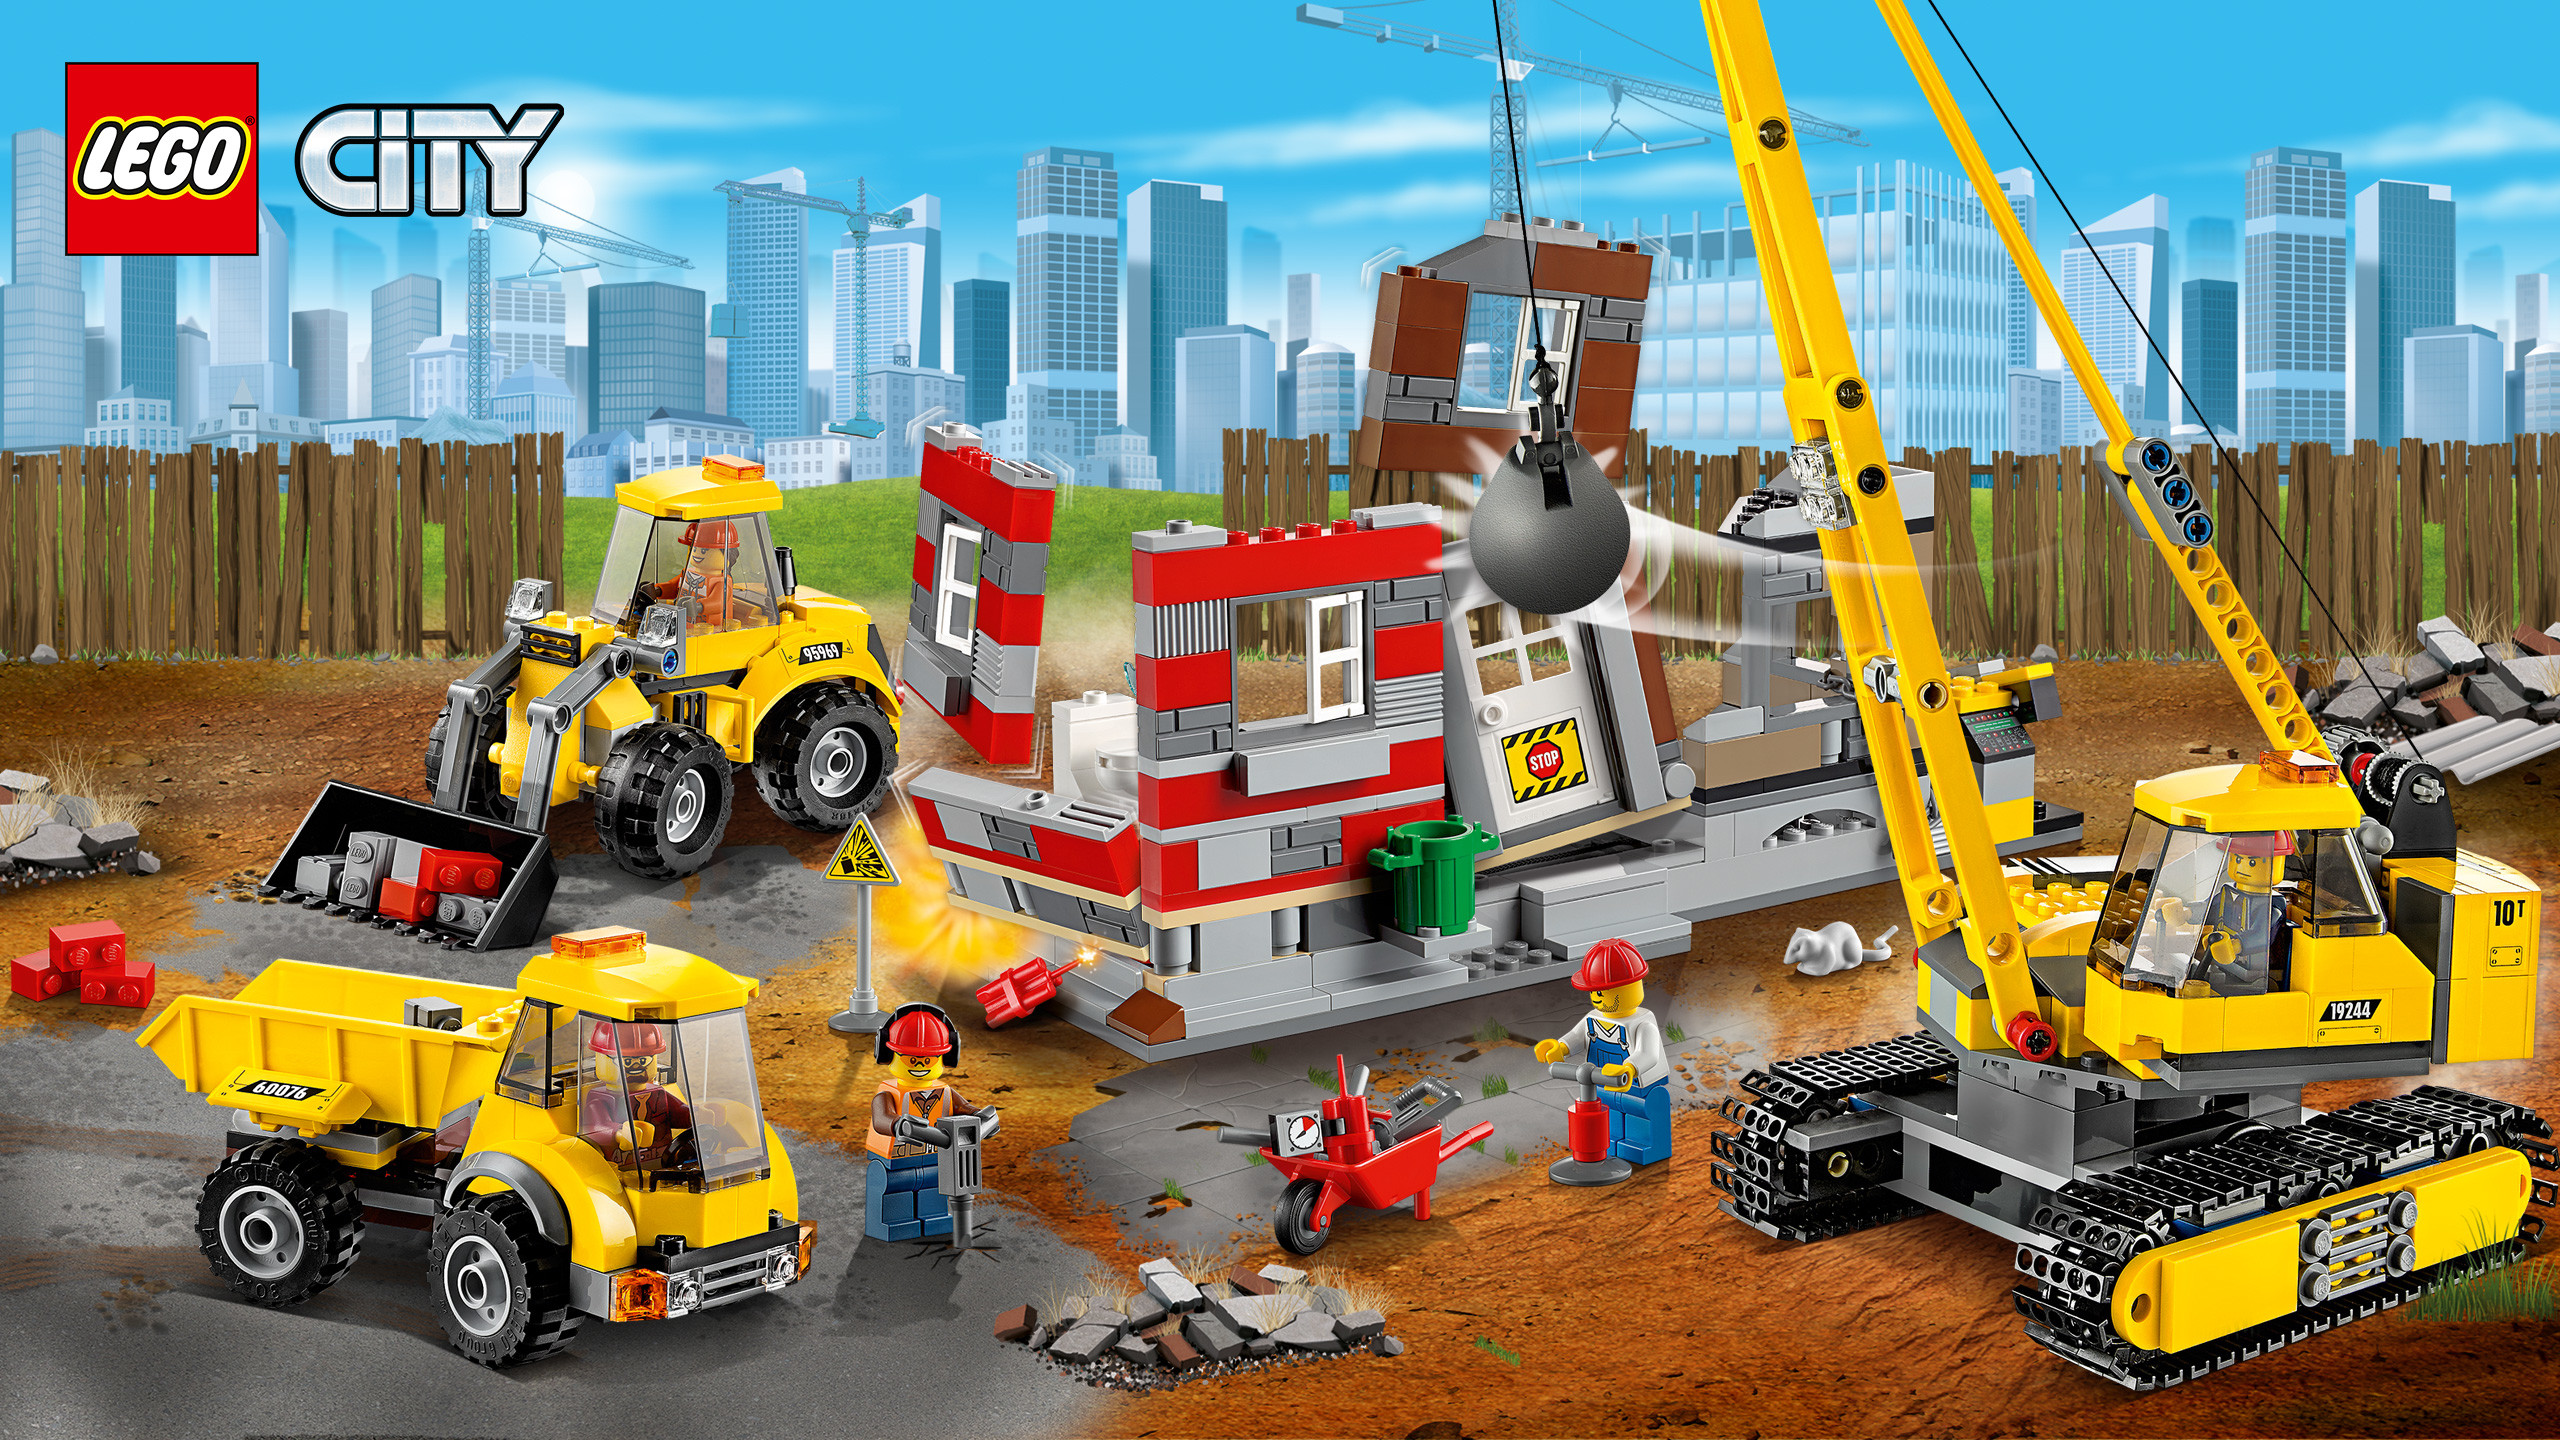 Lego City Wallpapers Wallpapertag Images, Photos, Reviews